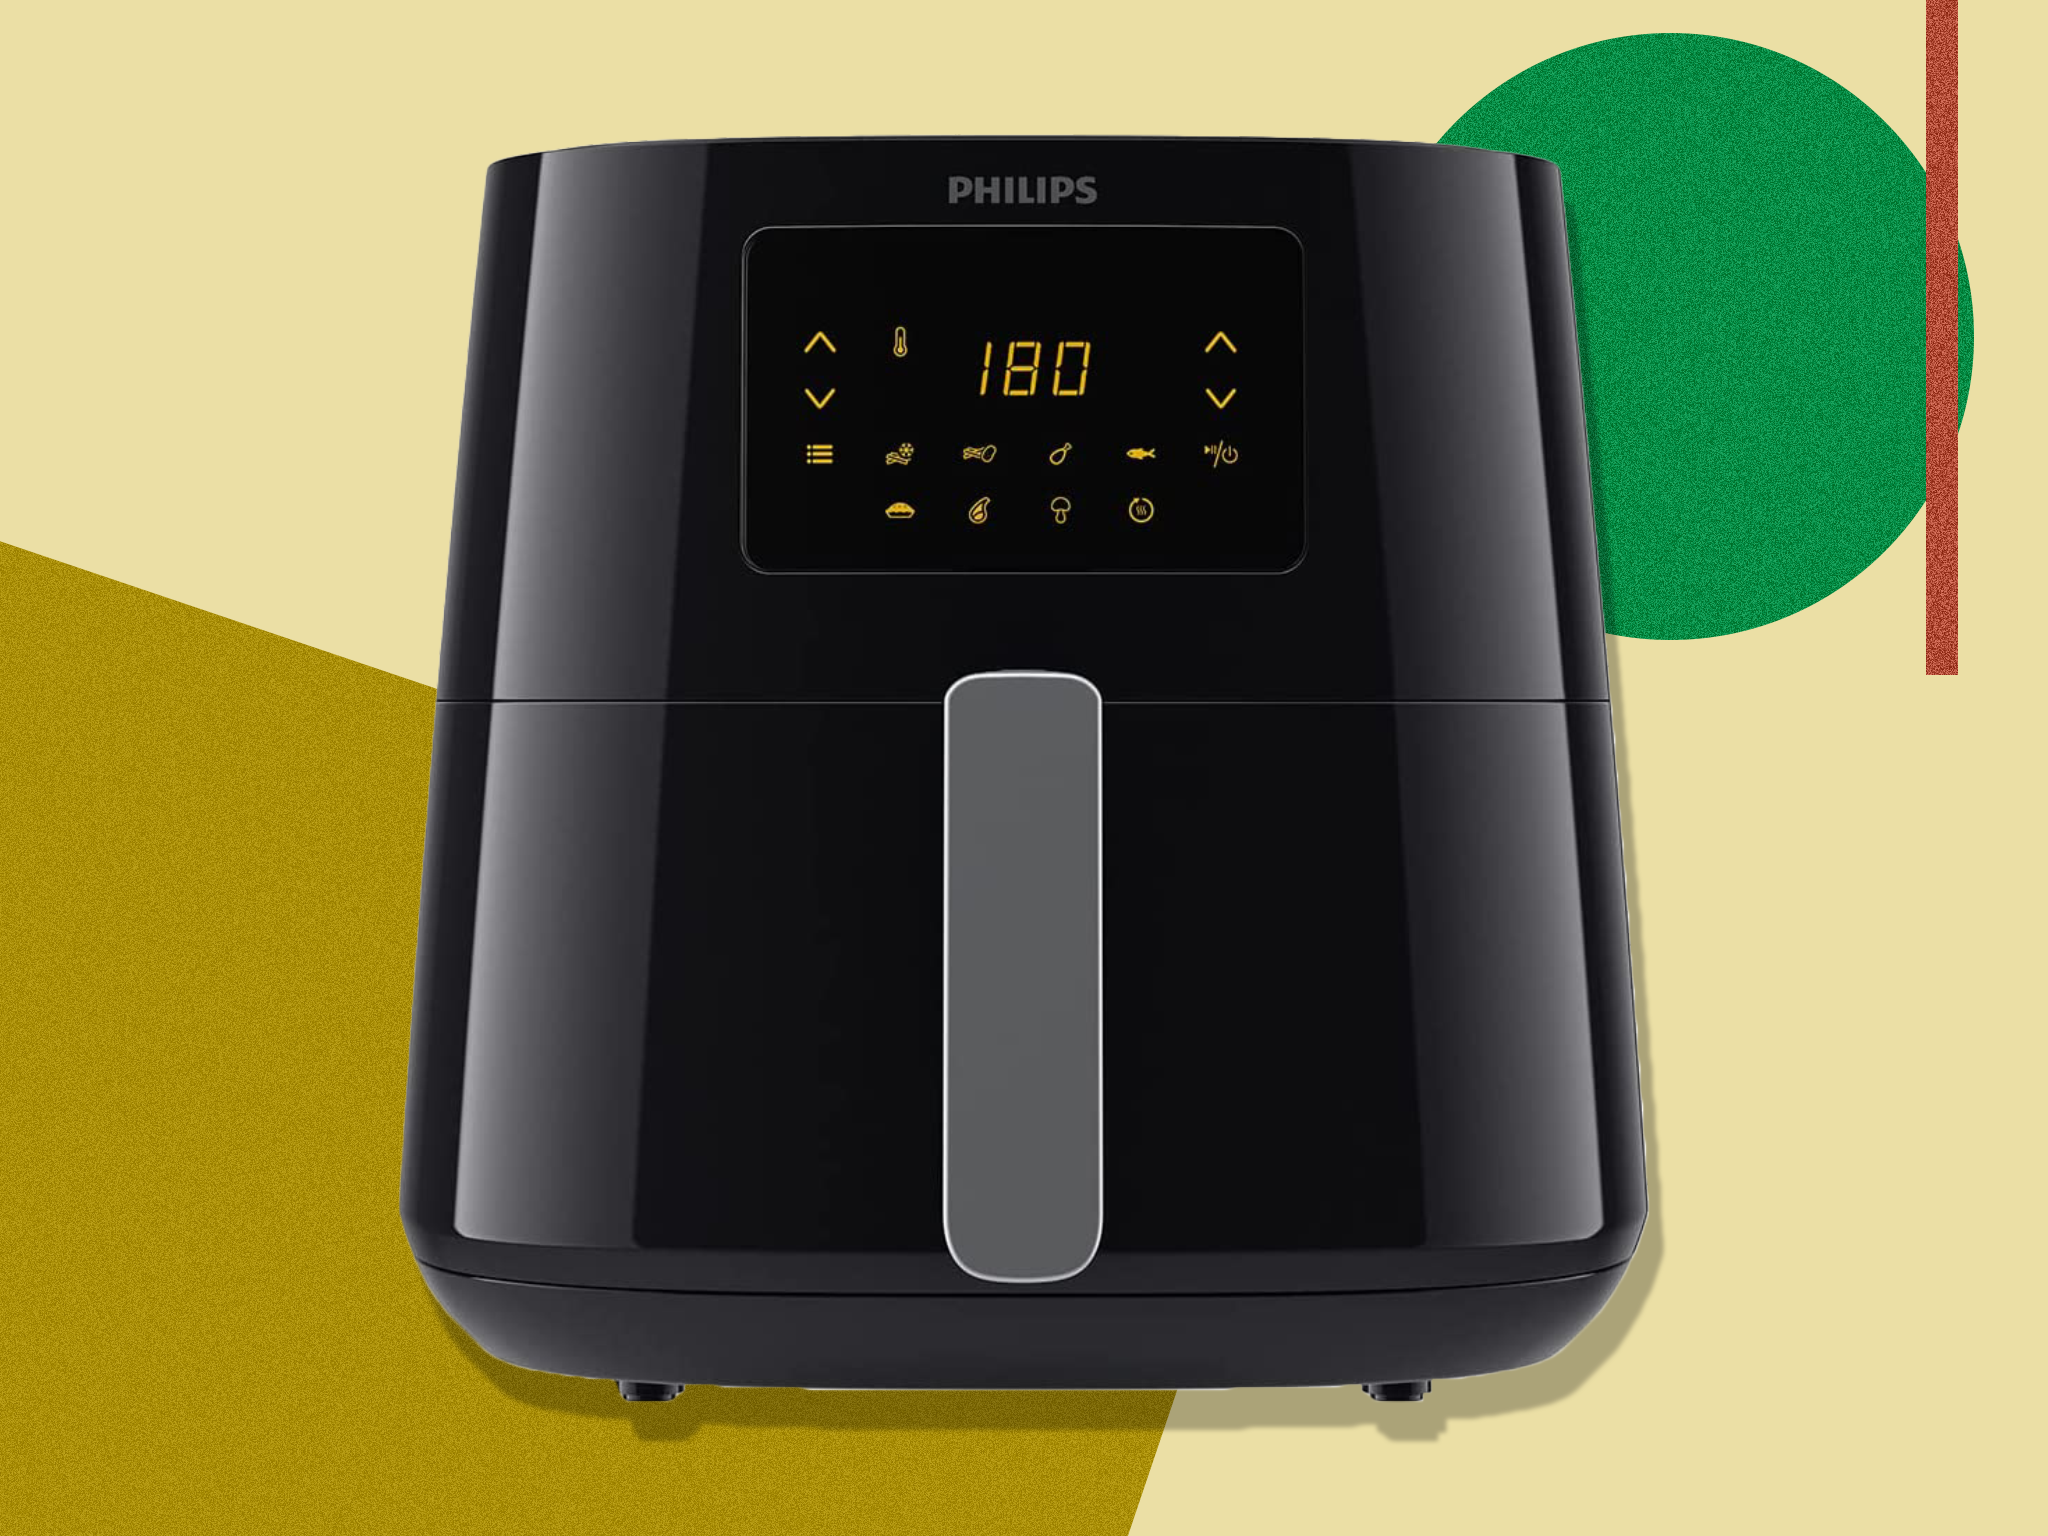 Prime Day air fryer deal: Save 25% on the Philips essential model